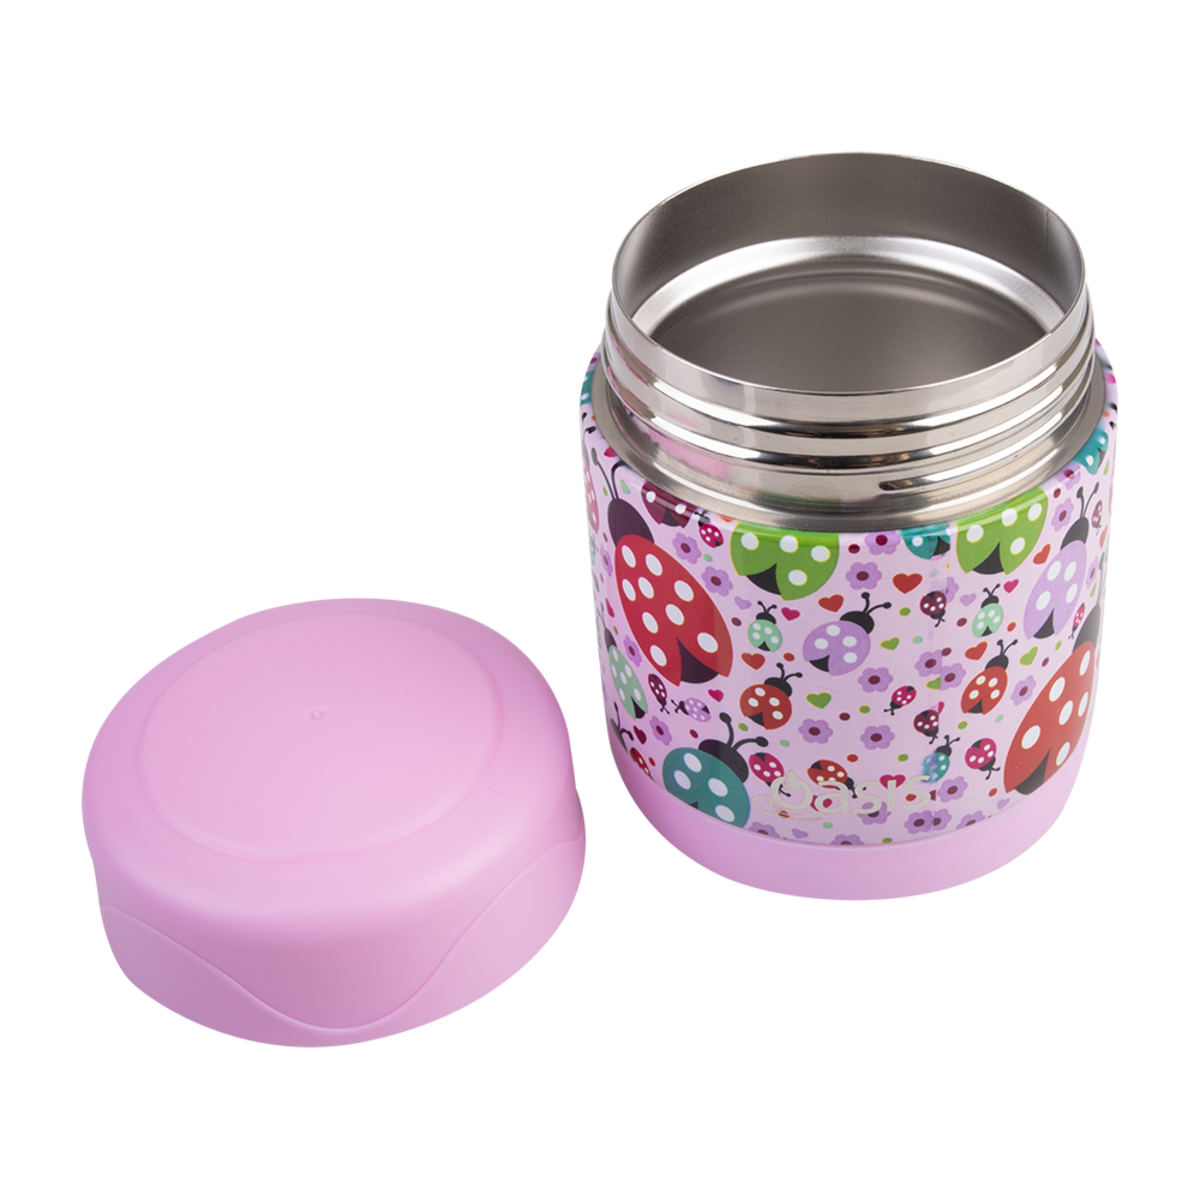 OASIS STAINLESS STEEL DOUBLE WALL INSULATED KID'S FOOD FLASK 300ML -LOVELY LADYBUGS